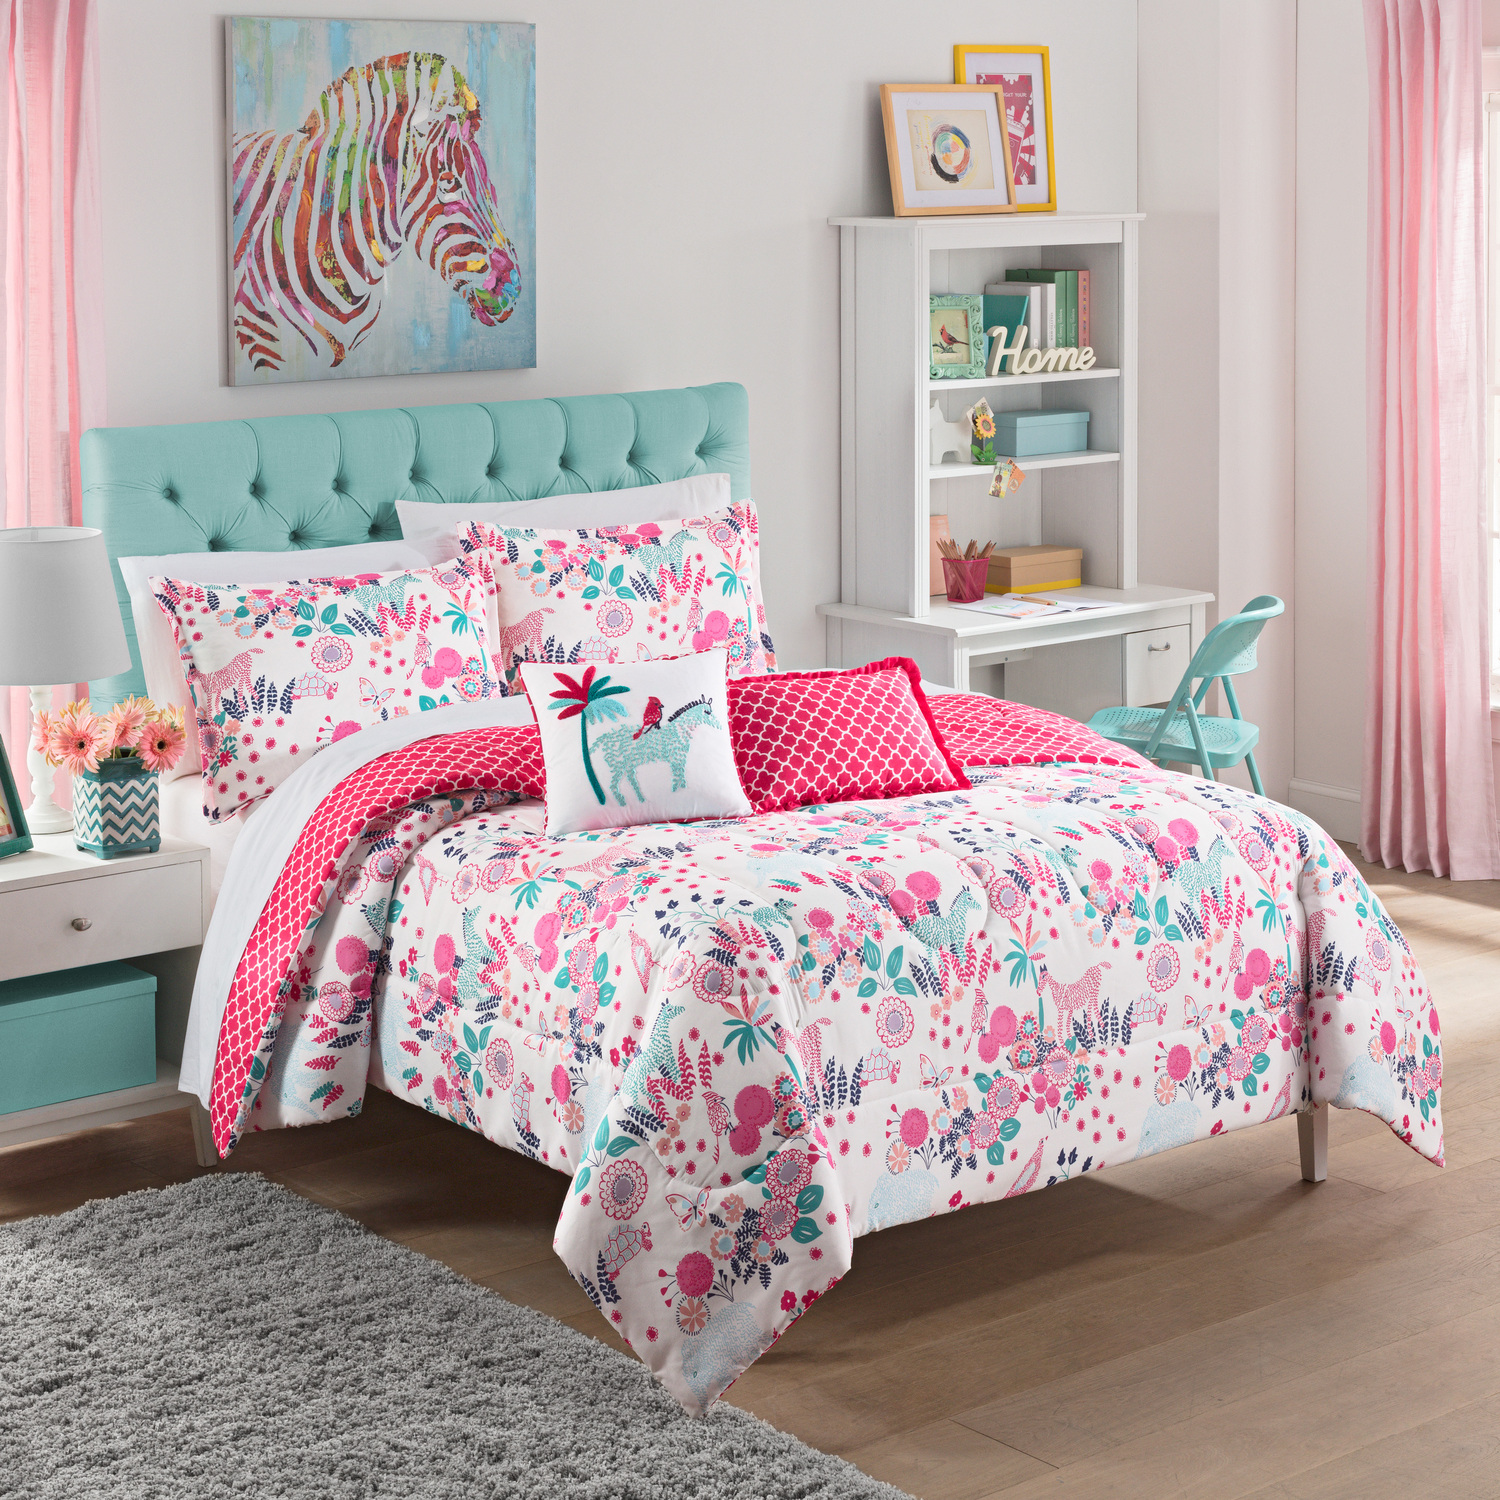 Reverie by Waverly Kids Bedding Collection ...